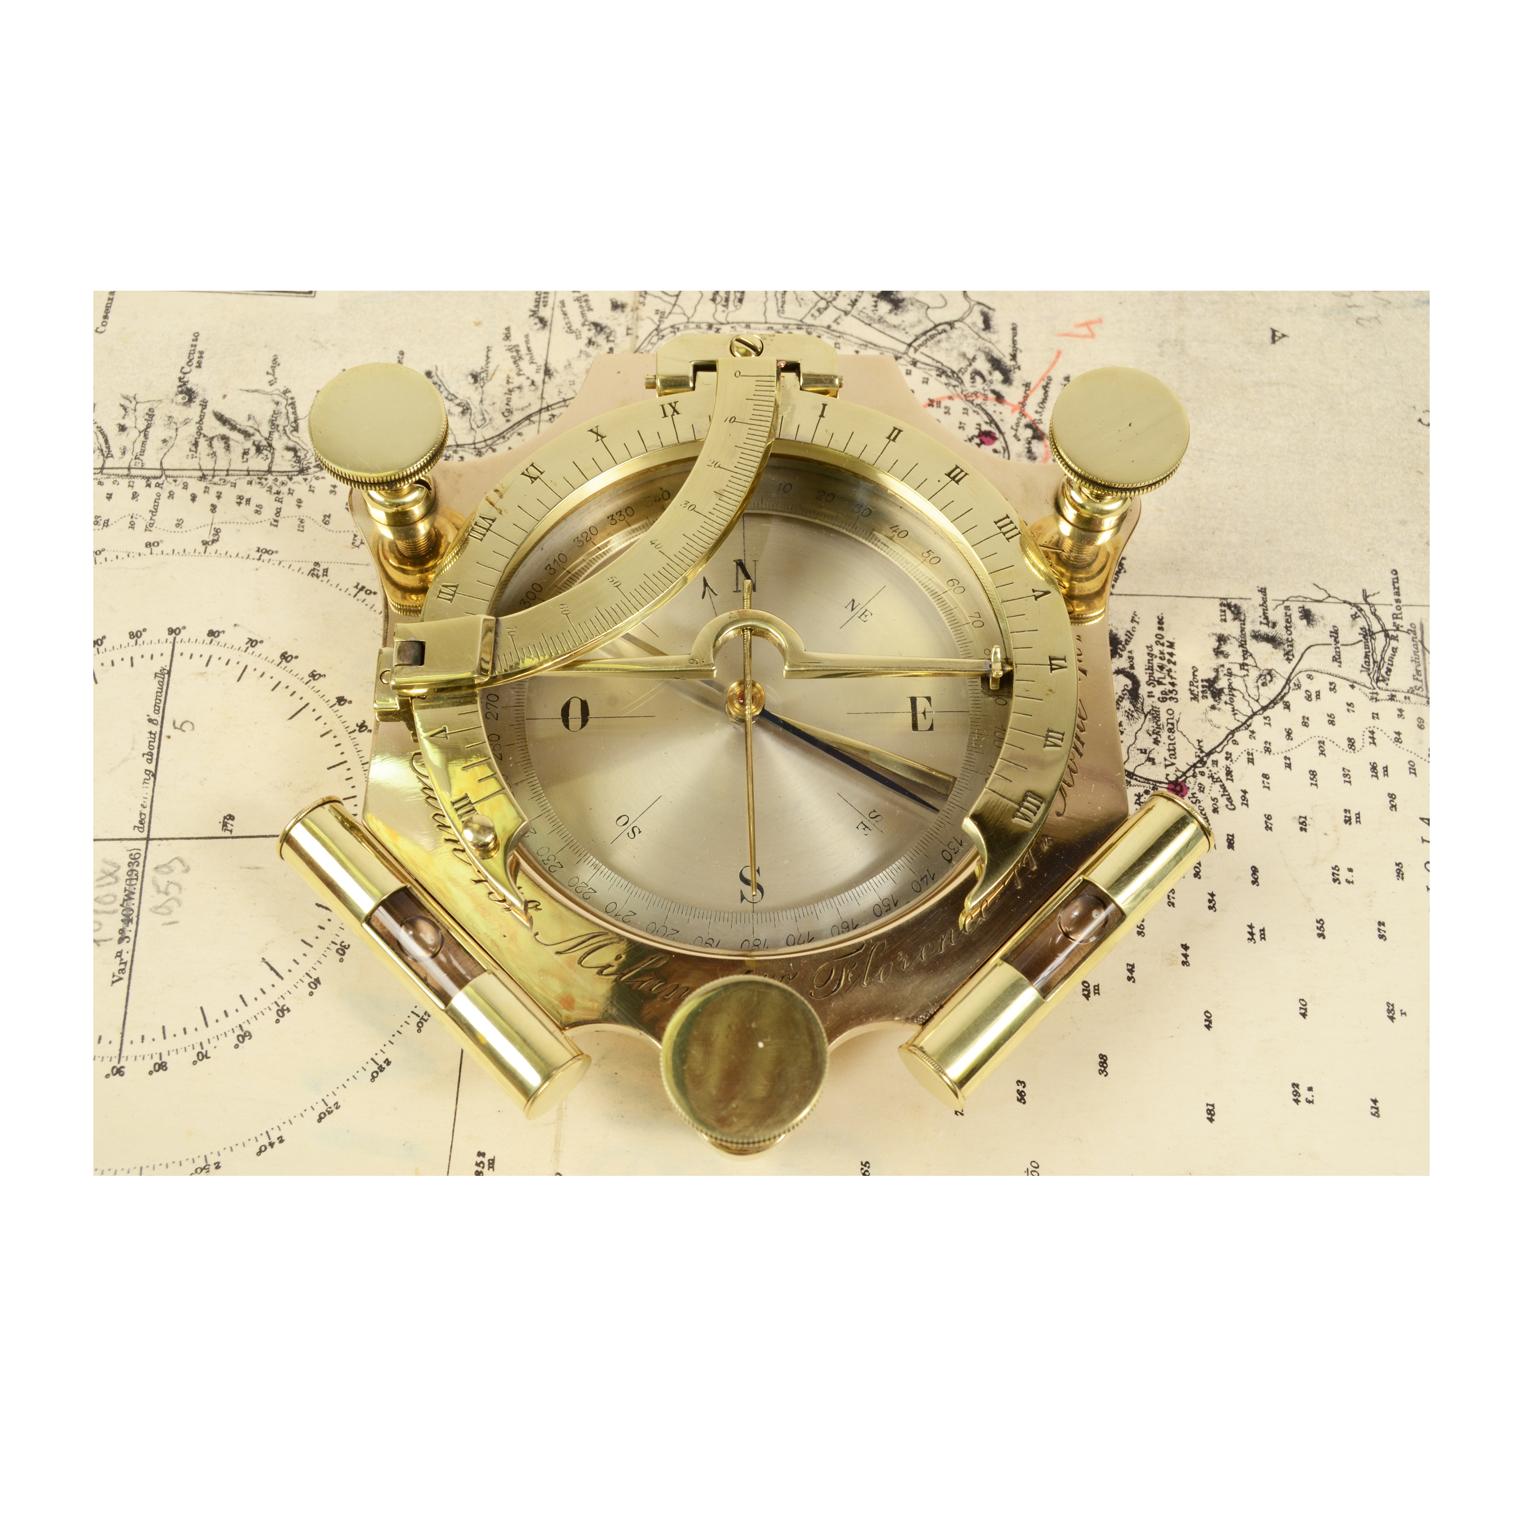 Equinoctial Sundial Engraved Brass and Glass Time Measuring Instrument UK 1840 7